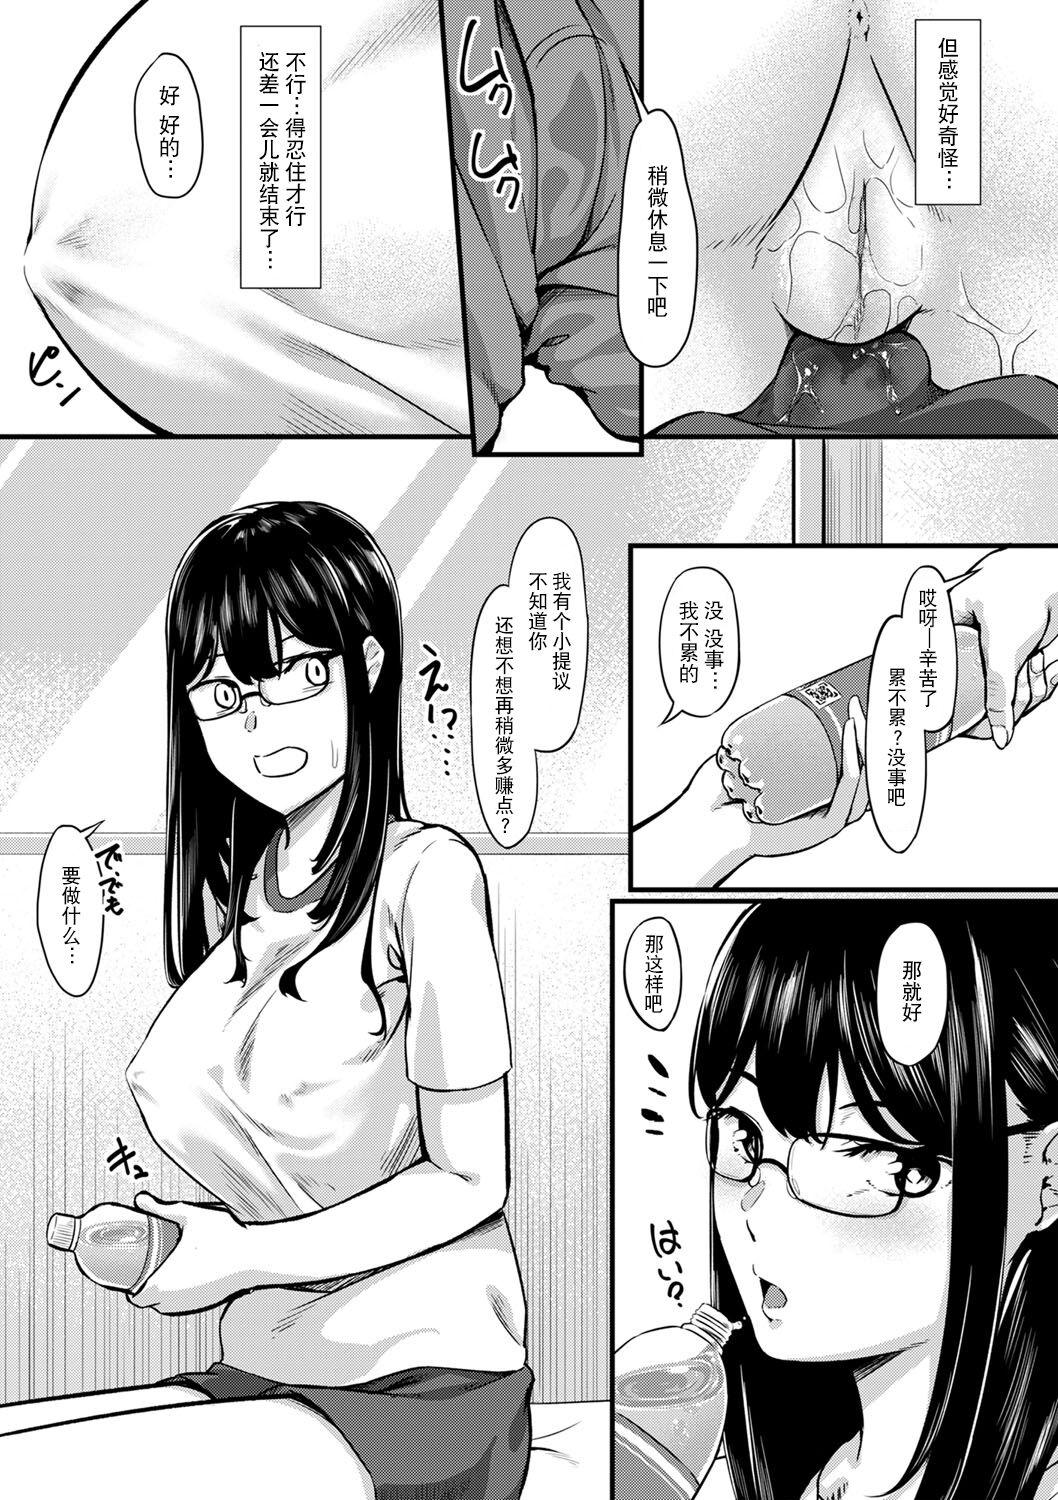 Lovers 沼に嵌まれば堕ちるだけ Pussylick - Page 6